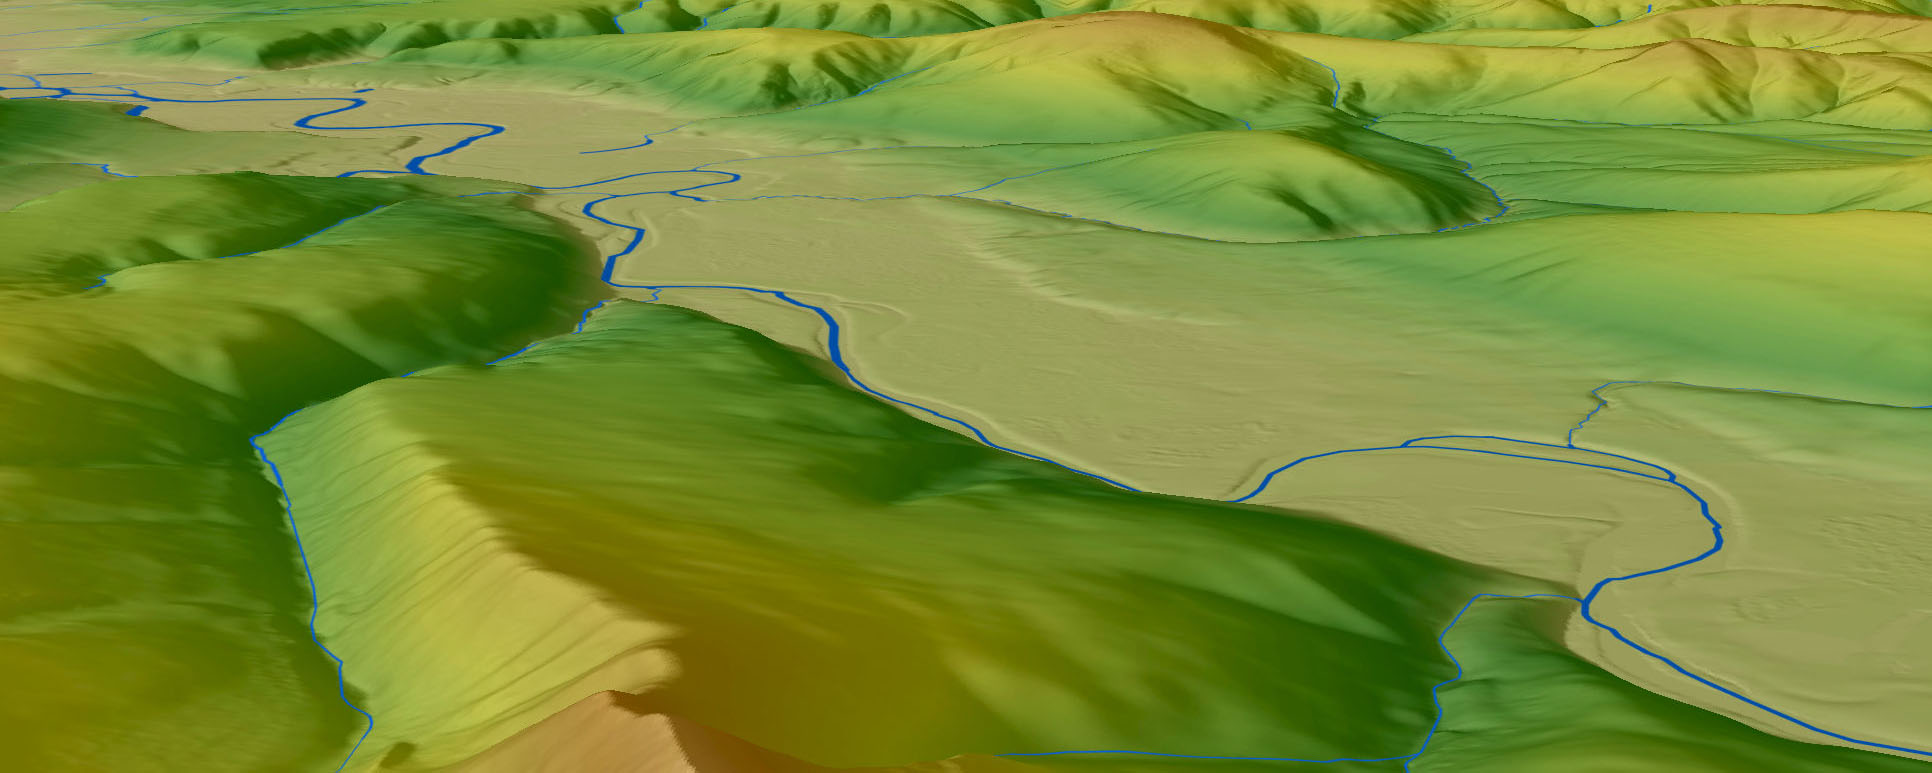 Before-Traditional hydrography depicts the main surface water flow in a valley. Woolpert's EDH process identifies highly impactful yet less visible surface water flows in the same valley.